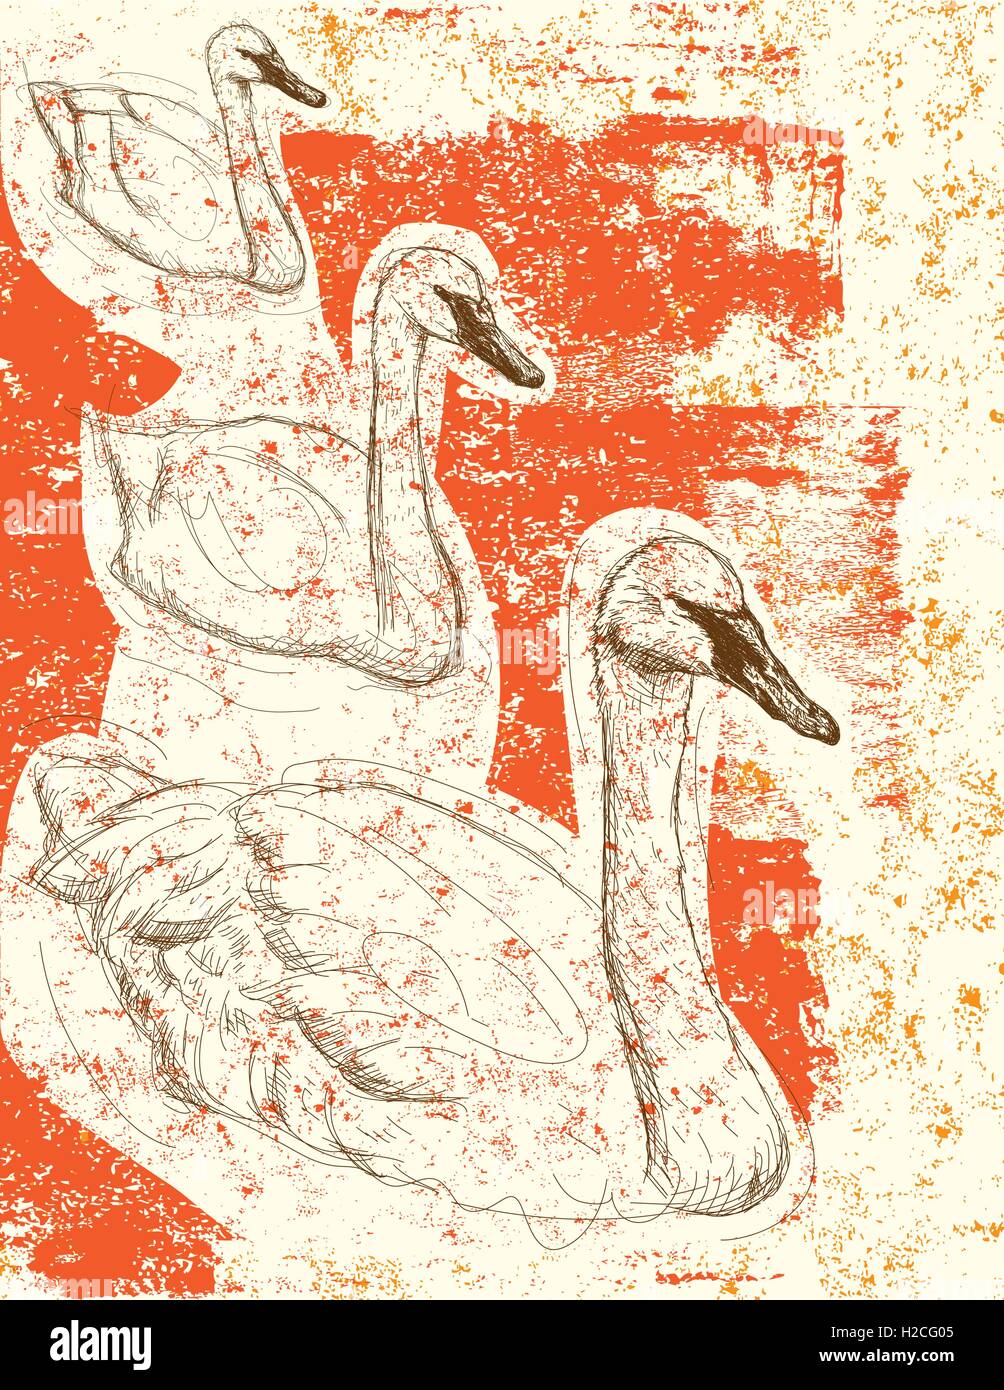 Swan background Sketchy swans over an abstract background. The birds and background are on separately labeled layers. Stock Vector